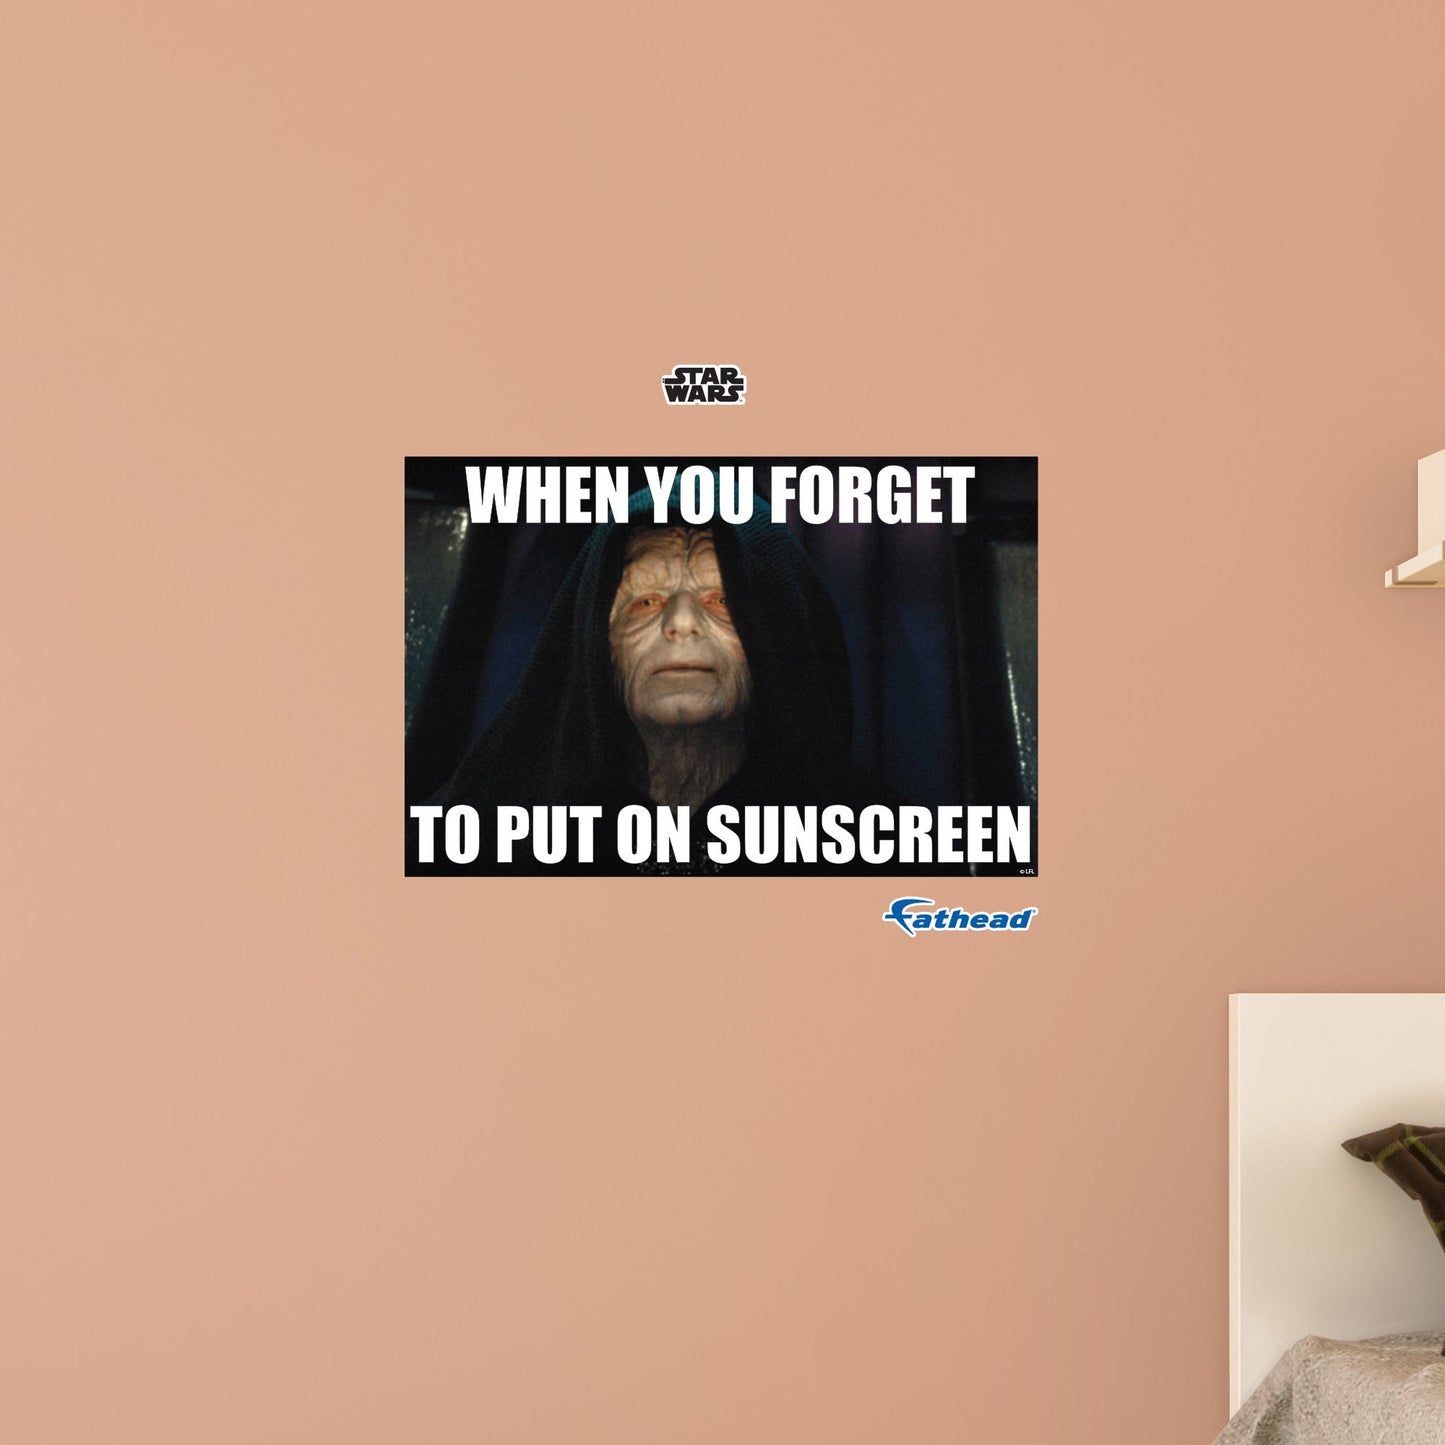 Put On Sunscreen meme Poster        - Officially Licensed Star Wars Removable     Adhesive Decal